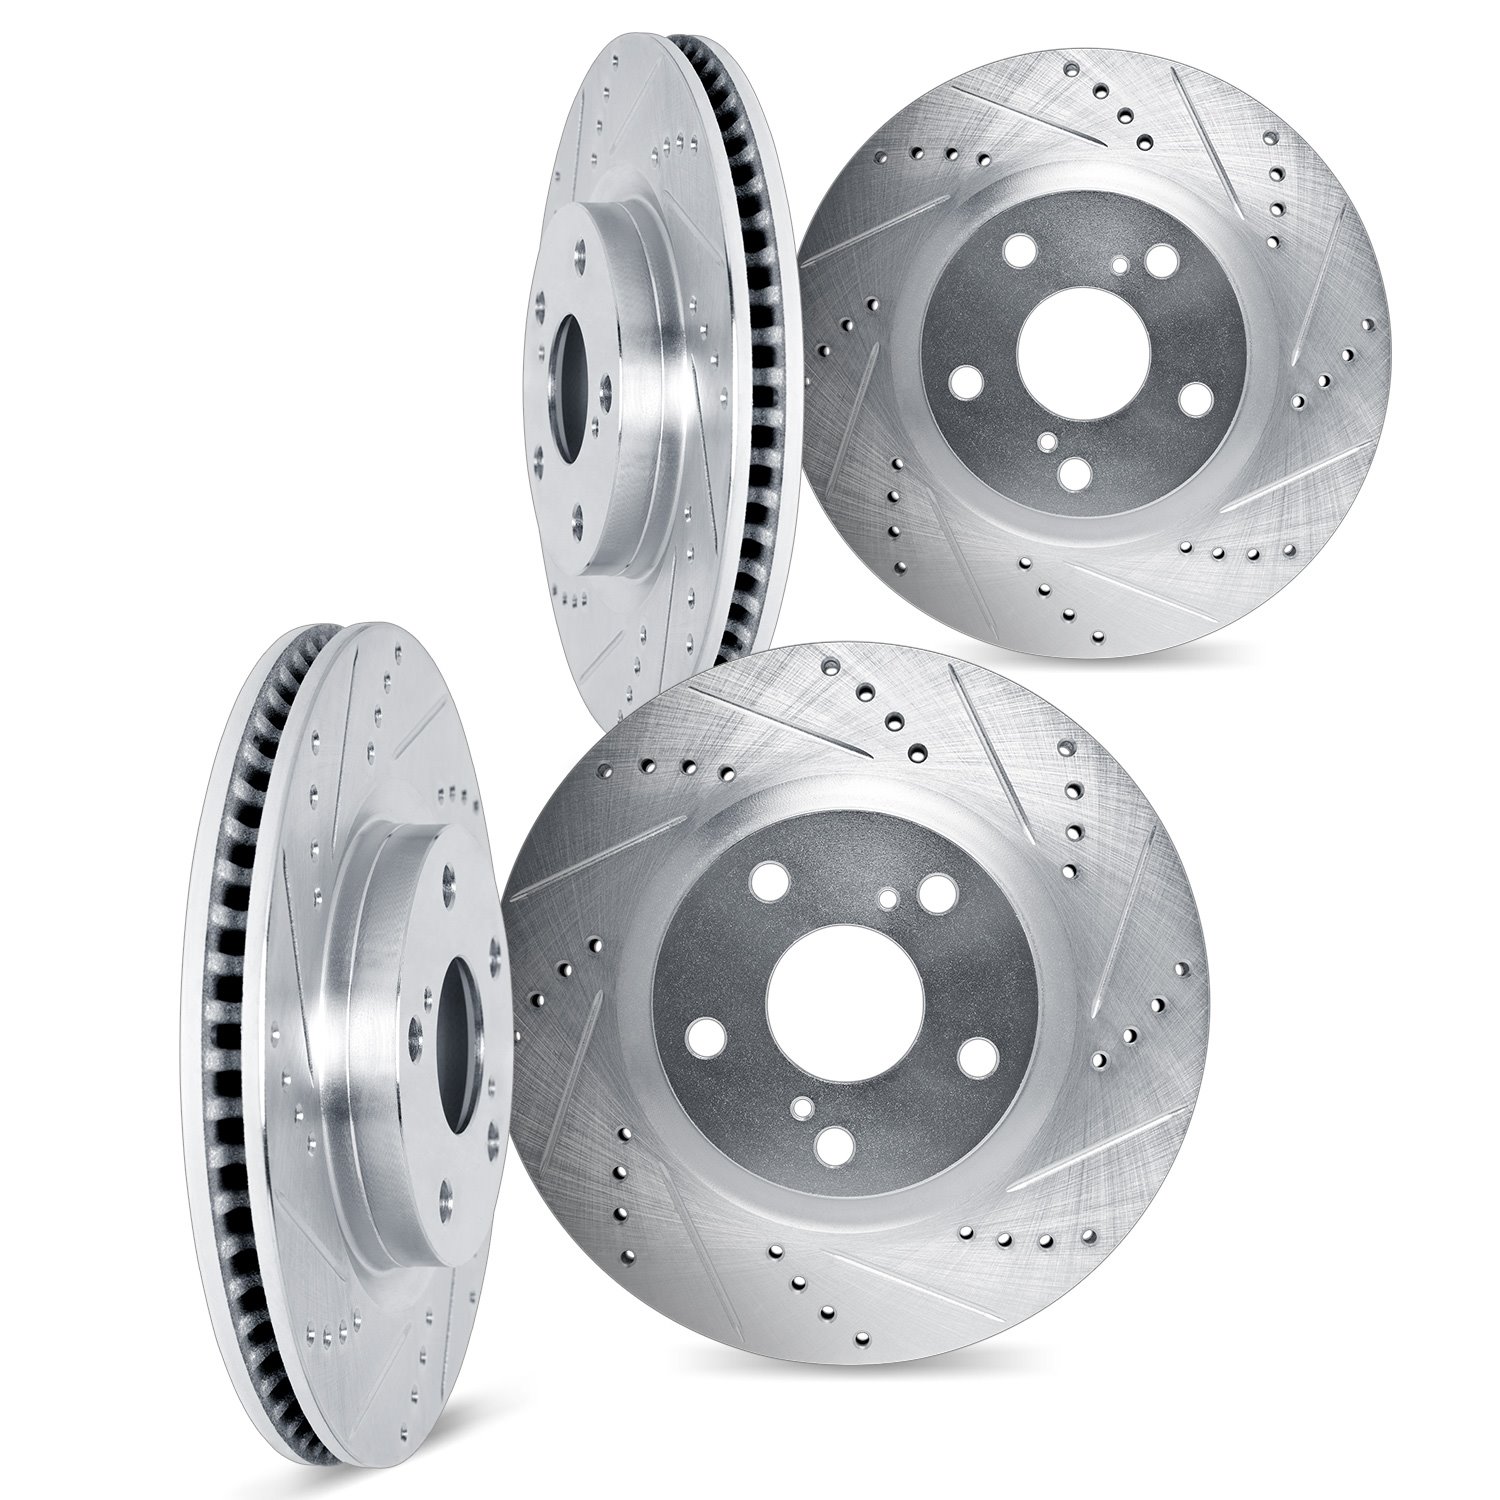 7004-20010 Drilled/Slotted Brake Rotors [Silver], 2006-2010 Jaguar, Position: Front and Rear